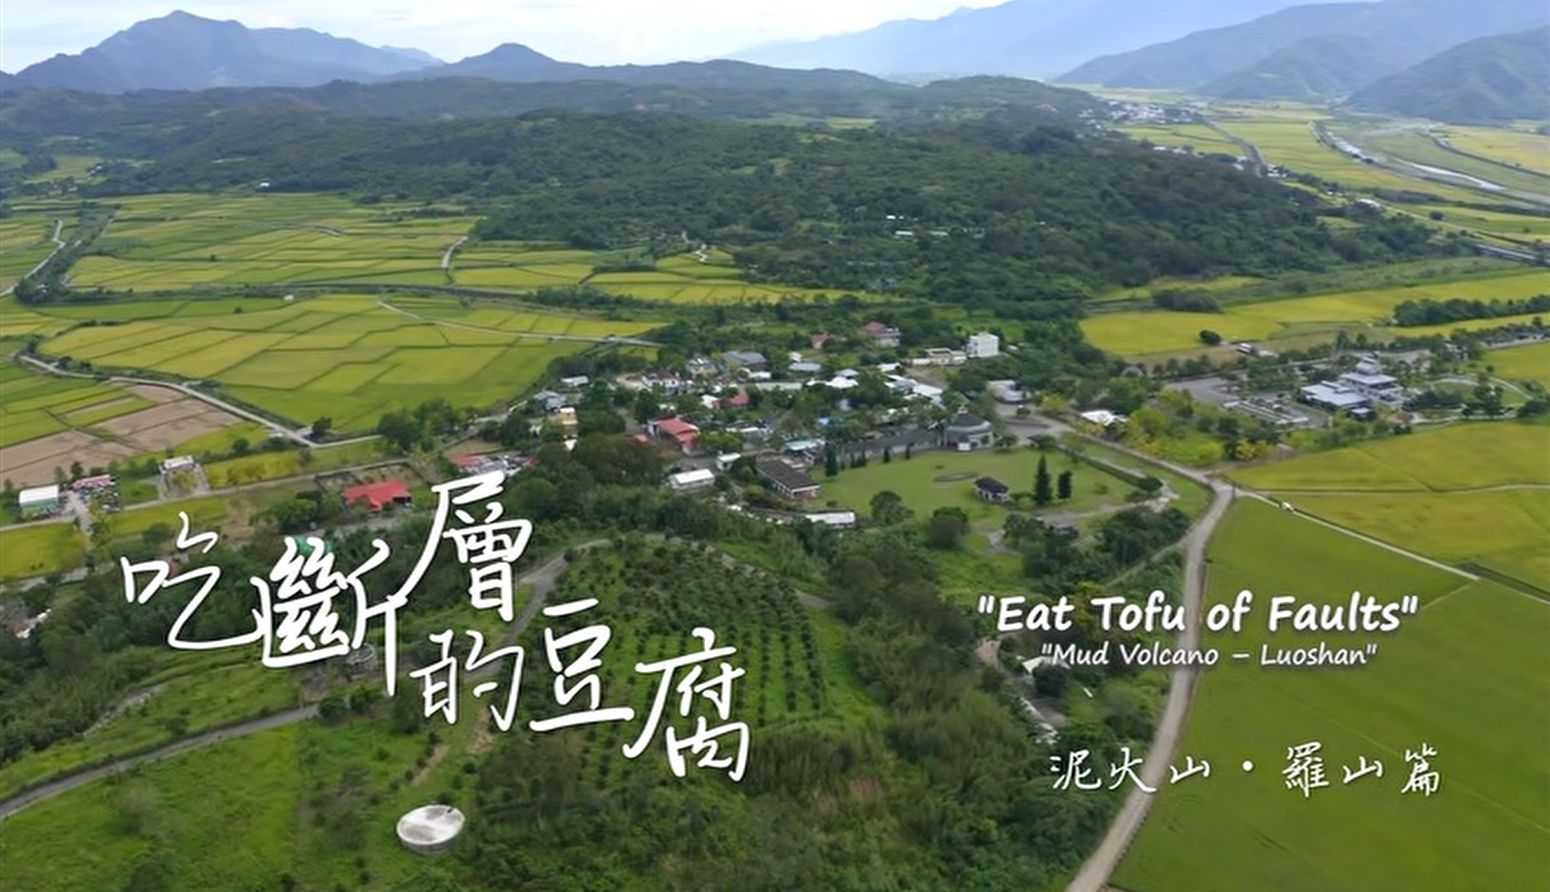 East Rift Valley Geological Landscape Tourism Promotional Video：Eat Faulty Tofu at Luoshan Mud Volcano Collection English